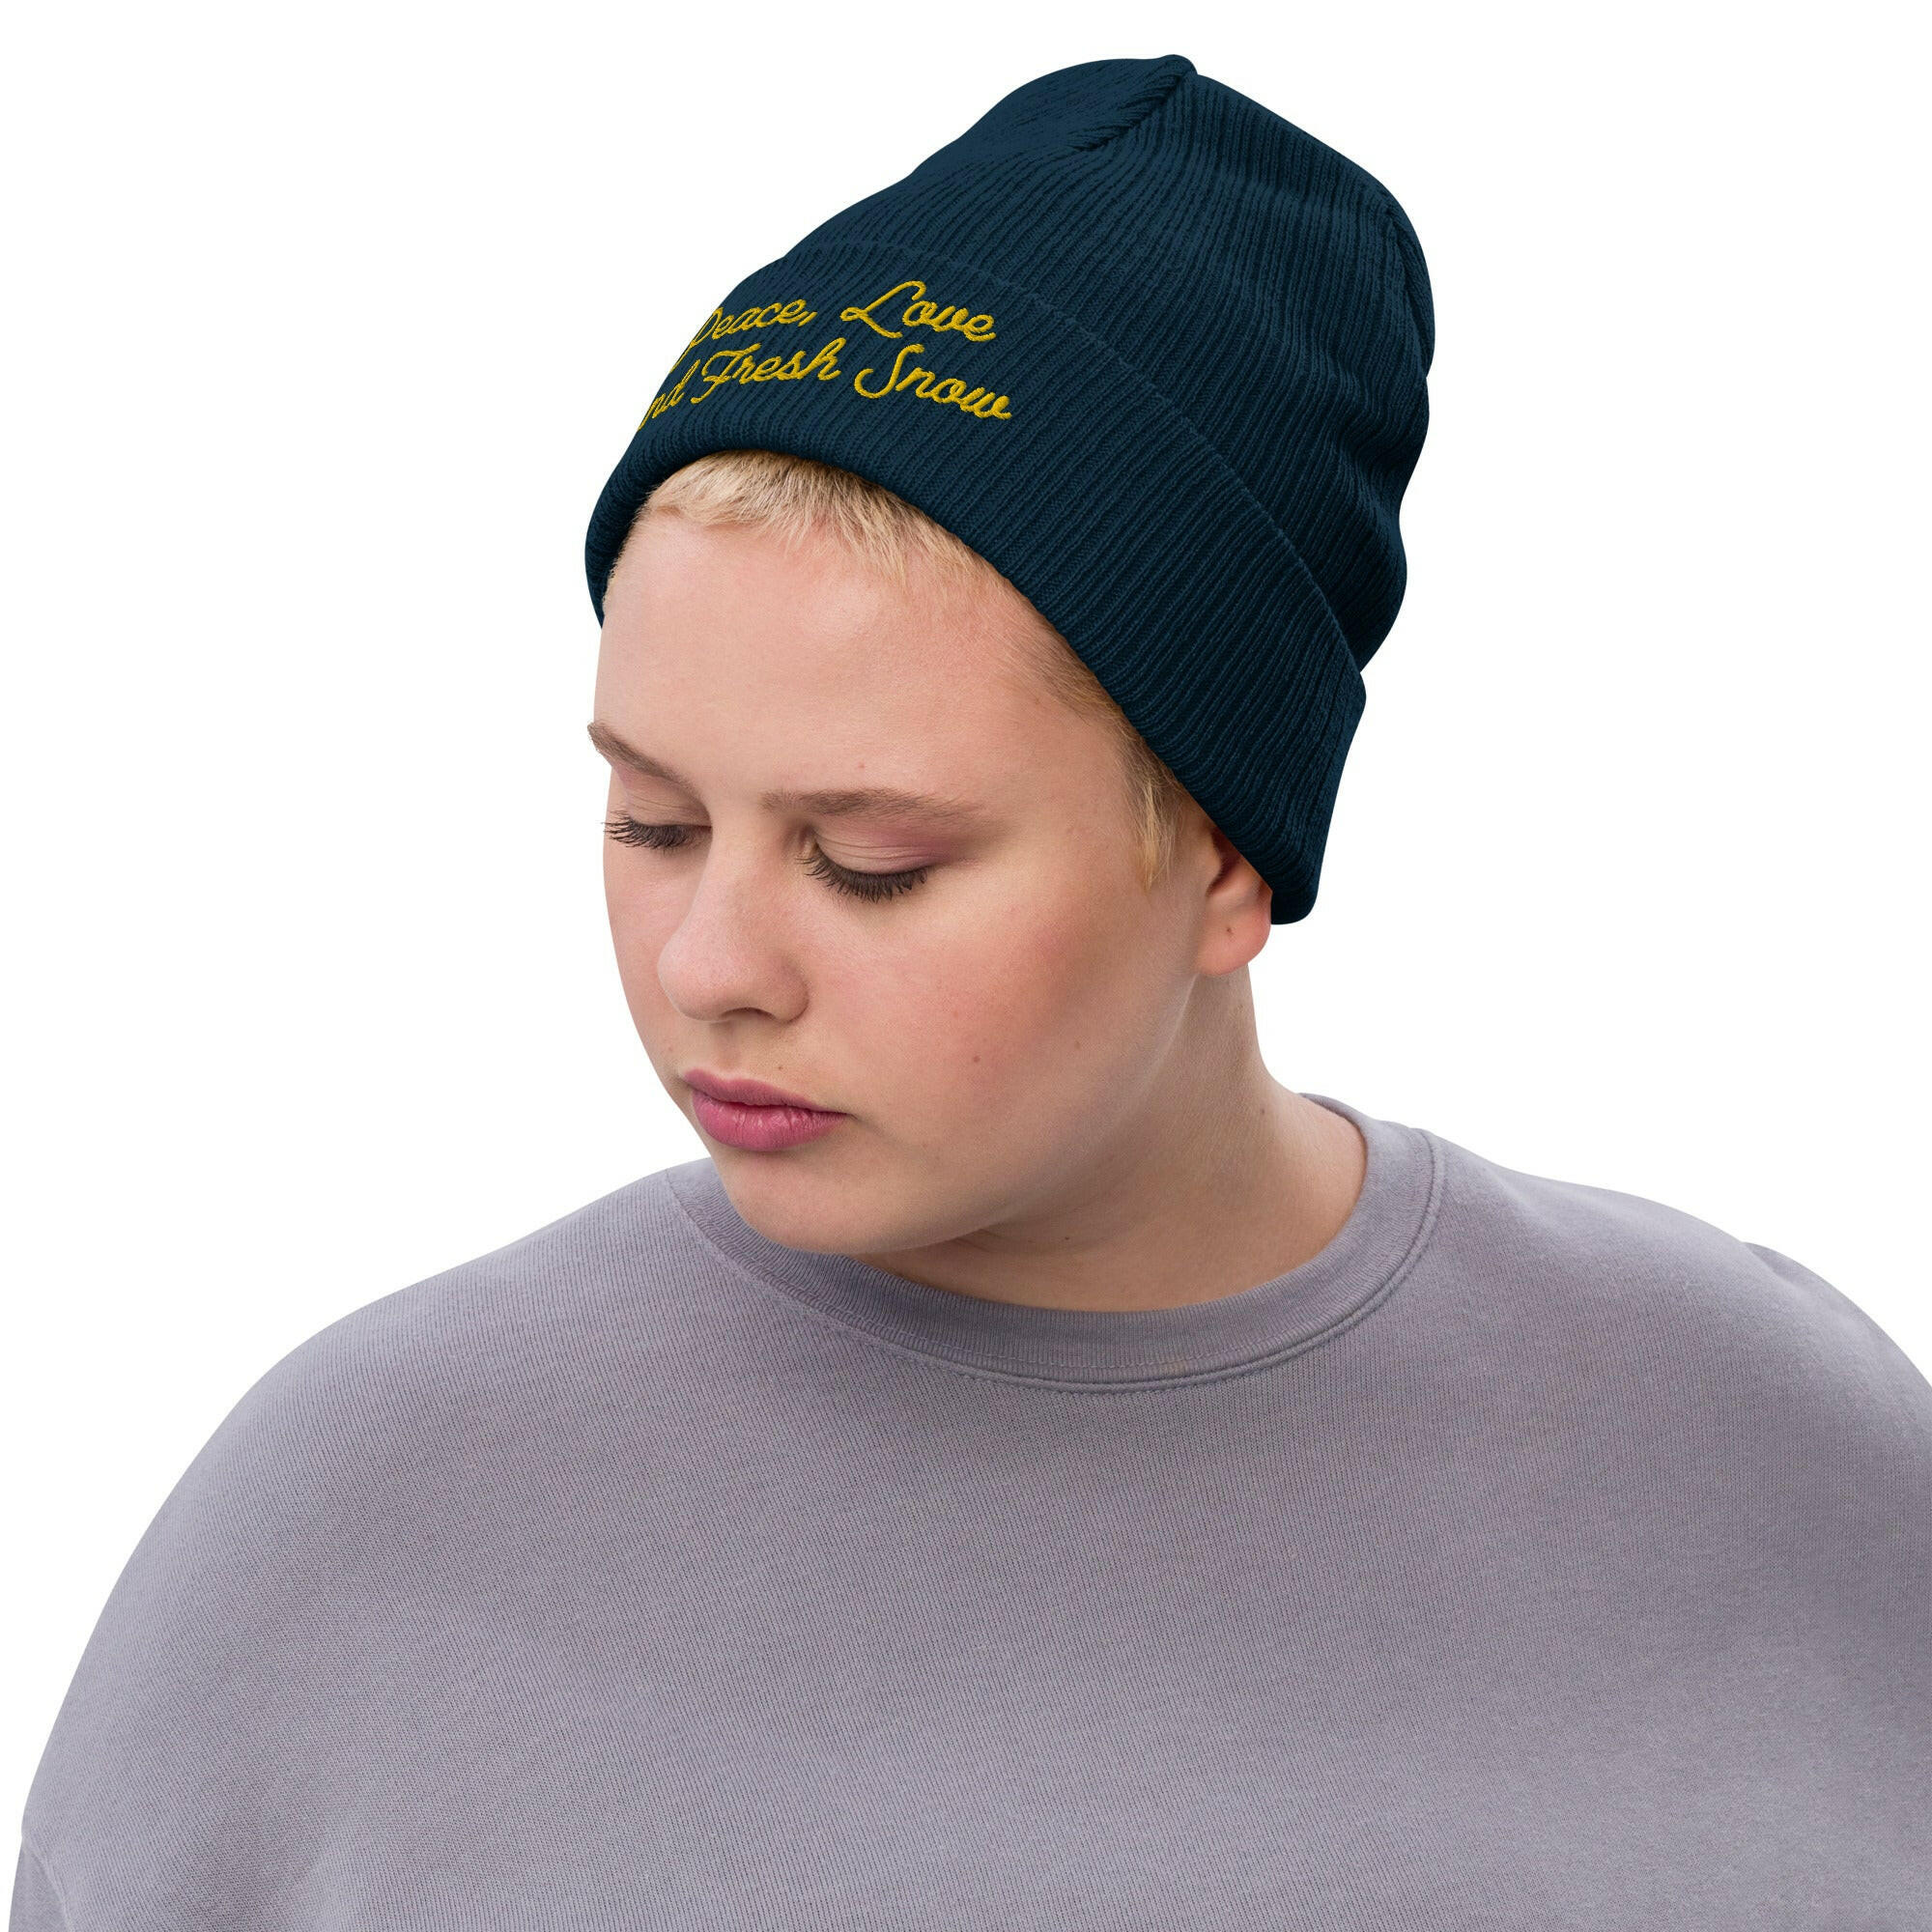 Eco ribbed knit beanie Peace, Love and Fresh Snow Gold